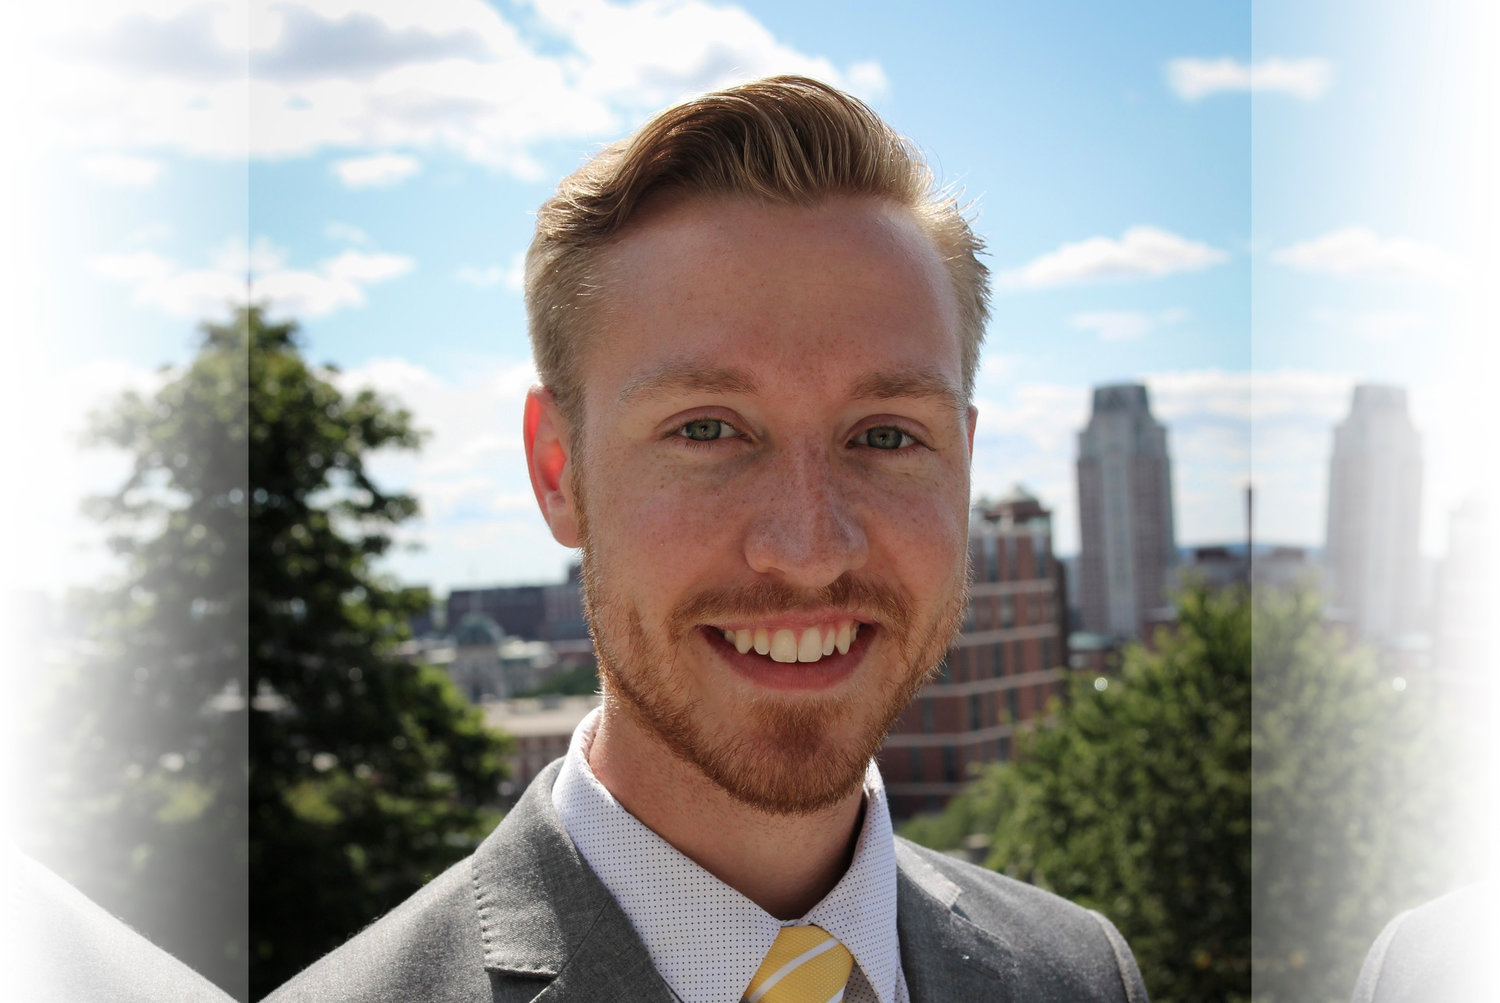 Bradly VanDerStand, DGH co-founder and Executive Director of Providence Tour Company